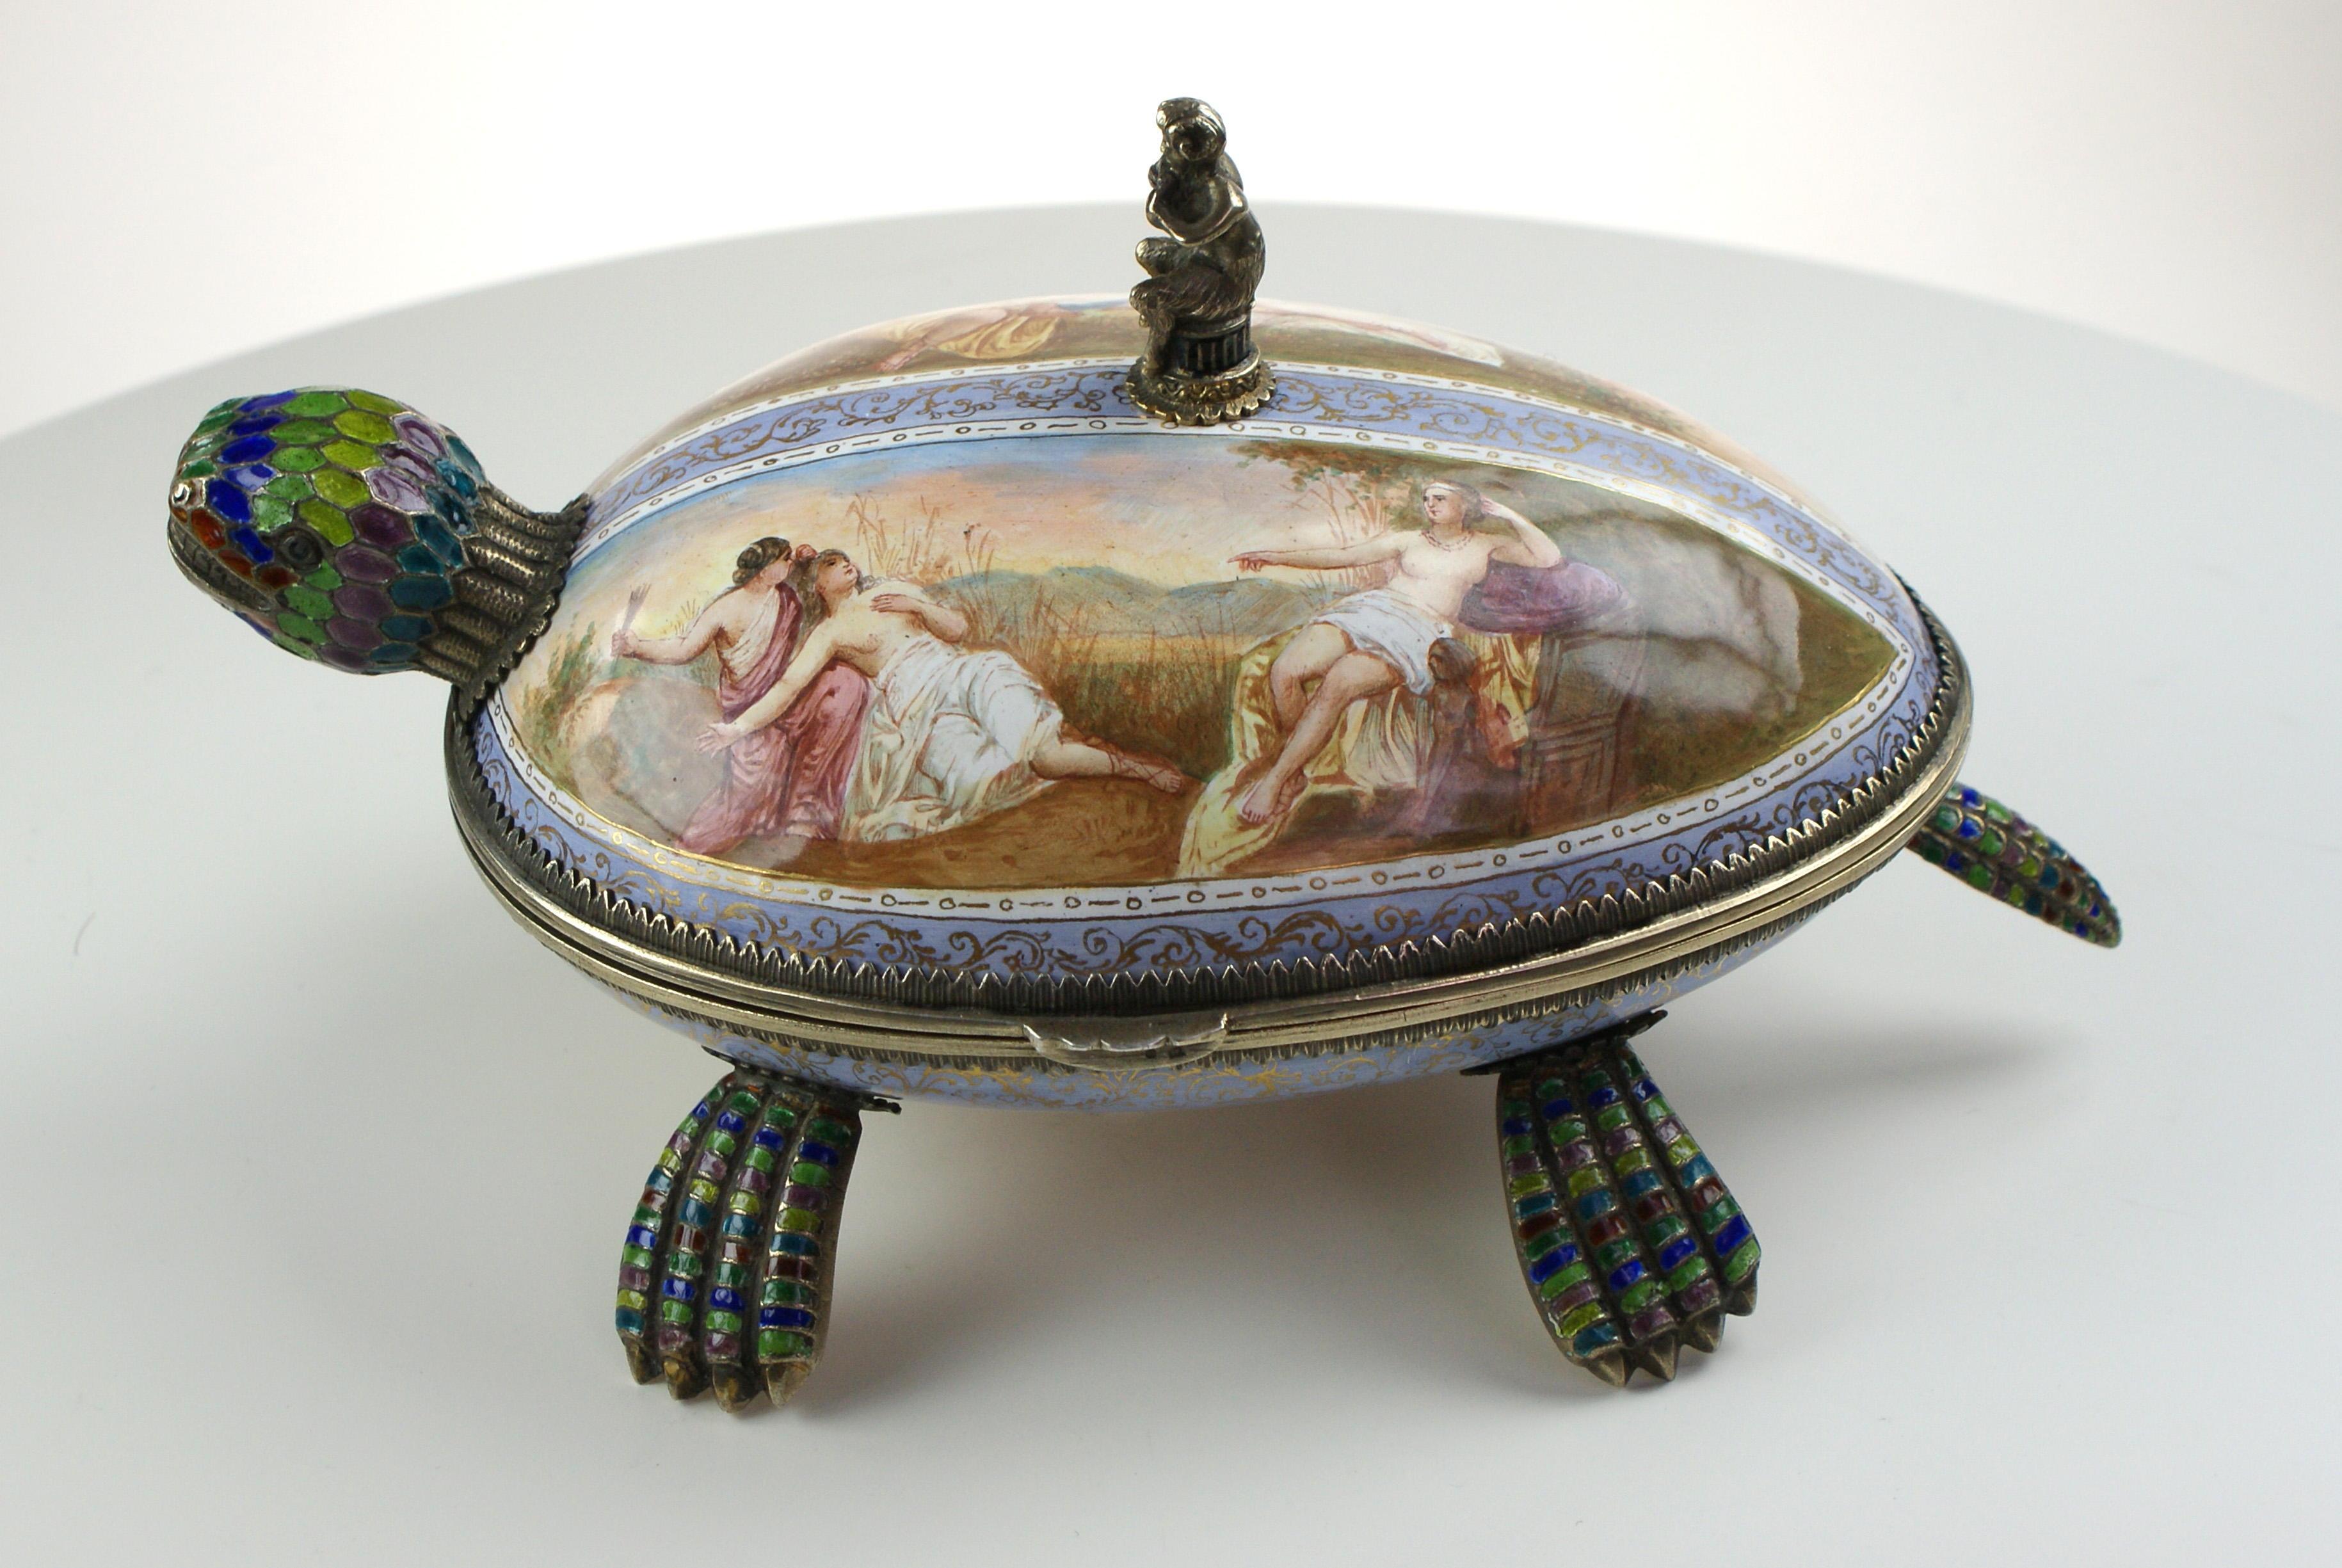 A fine Viennese silver gilt and enamel tortoise turtle box, by Hermann Bohm,
circa 1890.

The head, feet, and tail in multicolored enamels. The lid of the box with a silver and enamel finial of Pan the God of the wild playing the pipes. The Top